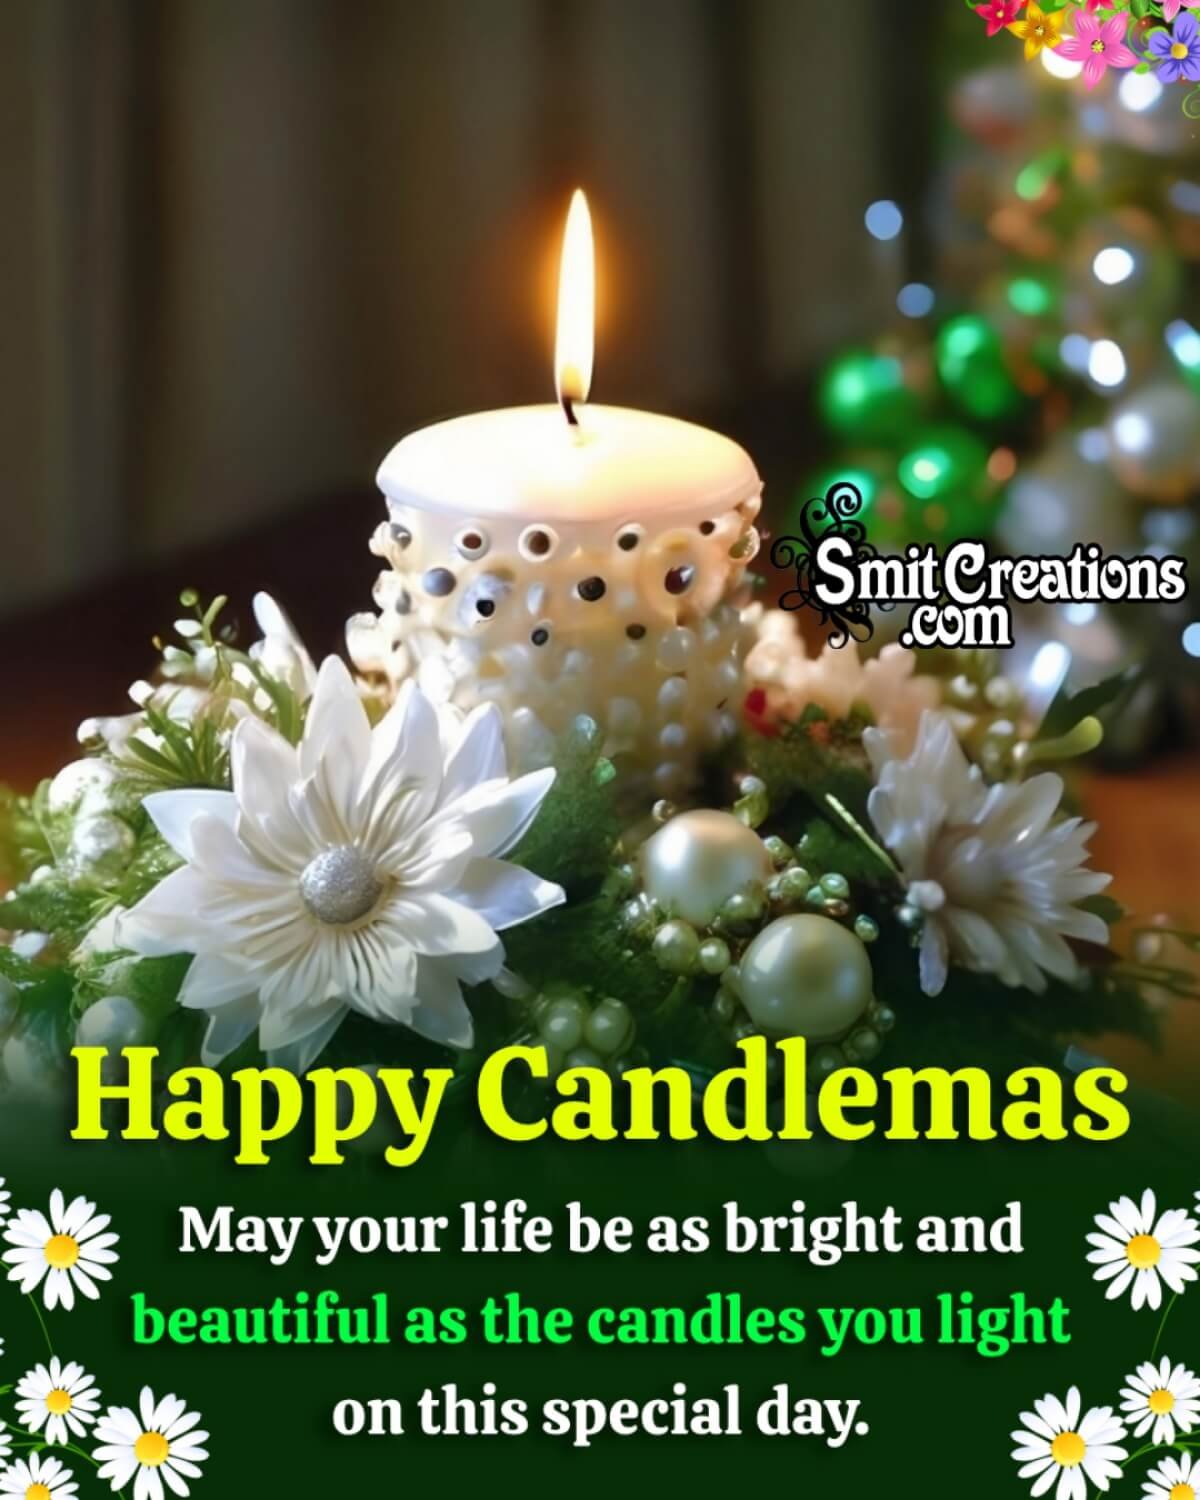 Happy Candlemas Greetings